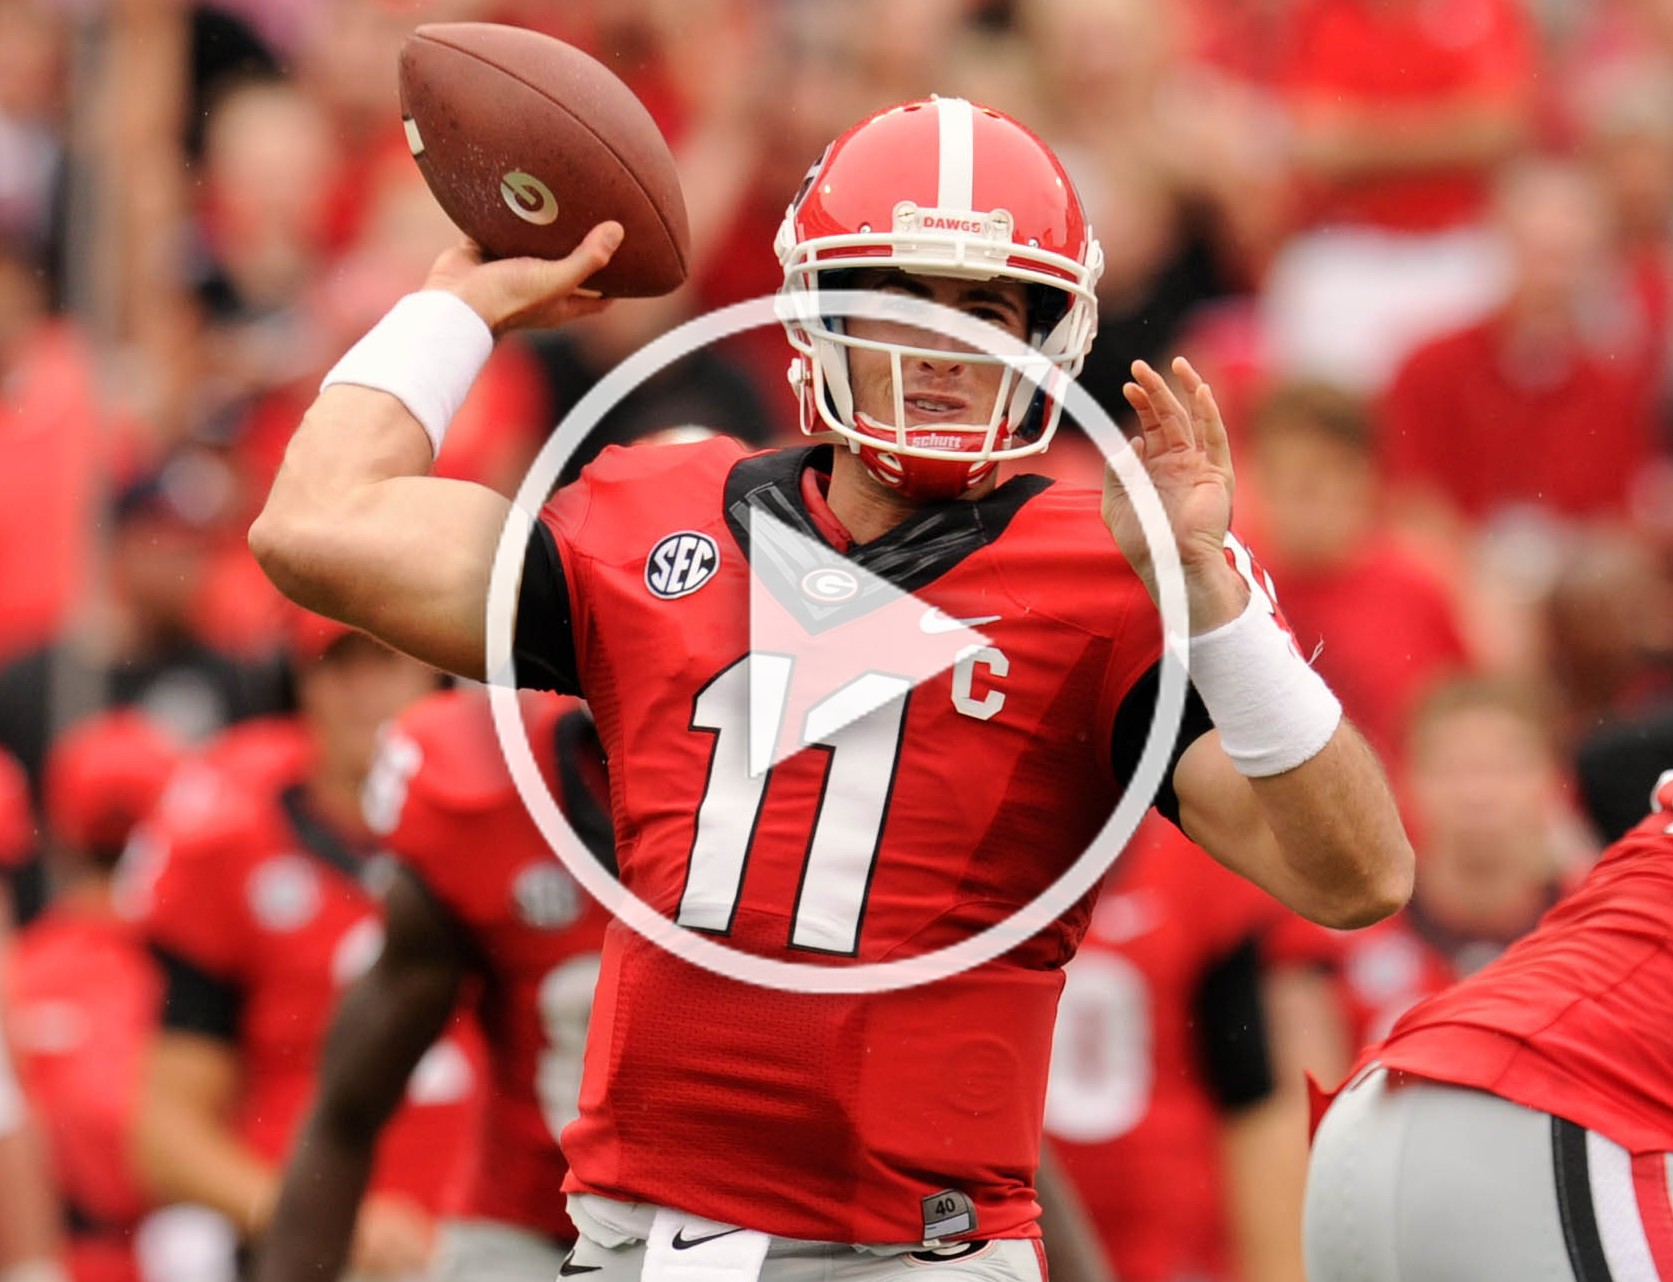 Aaron Murray talks UGA QBs, Kirby's locker room speech, working for CBS in UGA game and much more (Nov. 18, 2021)